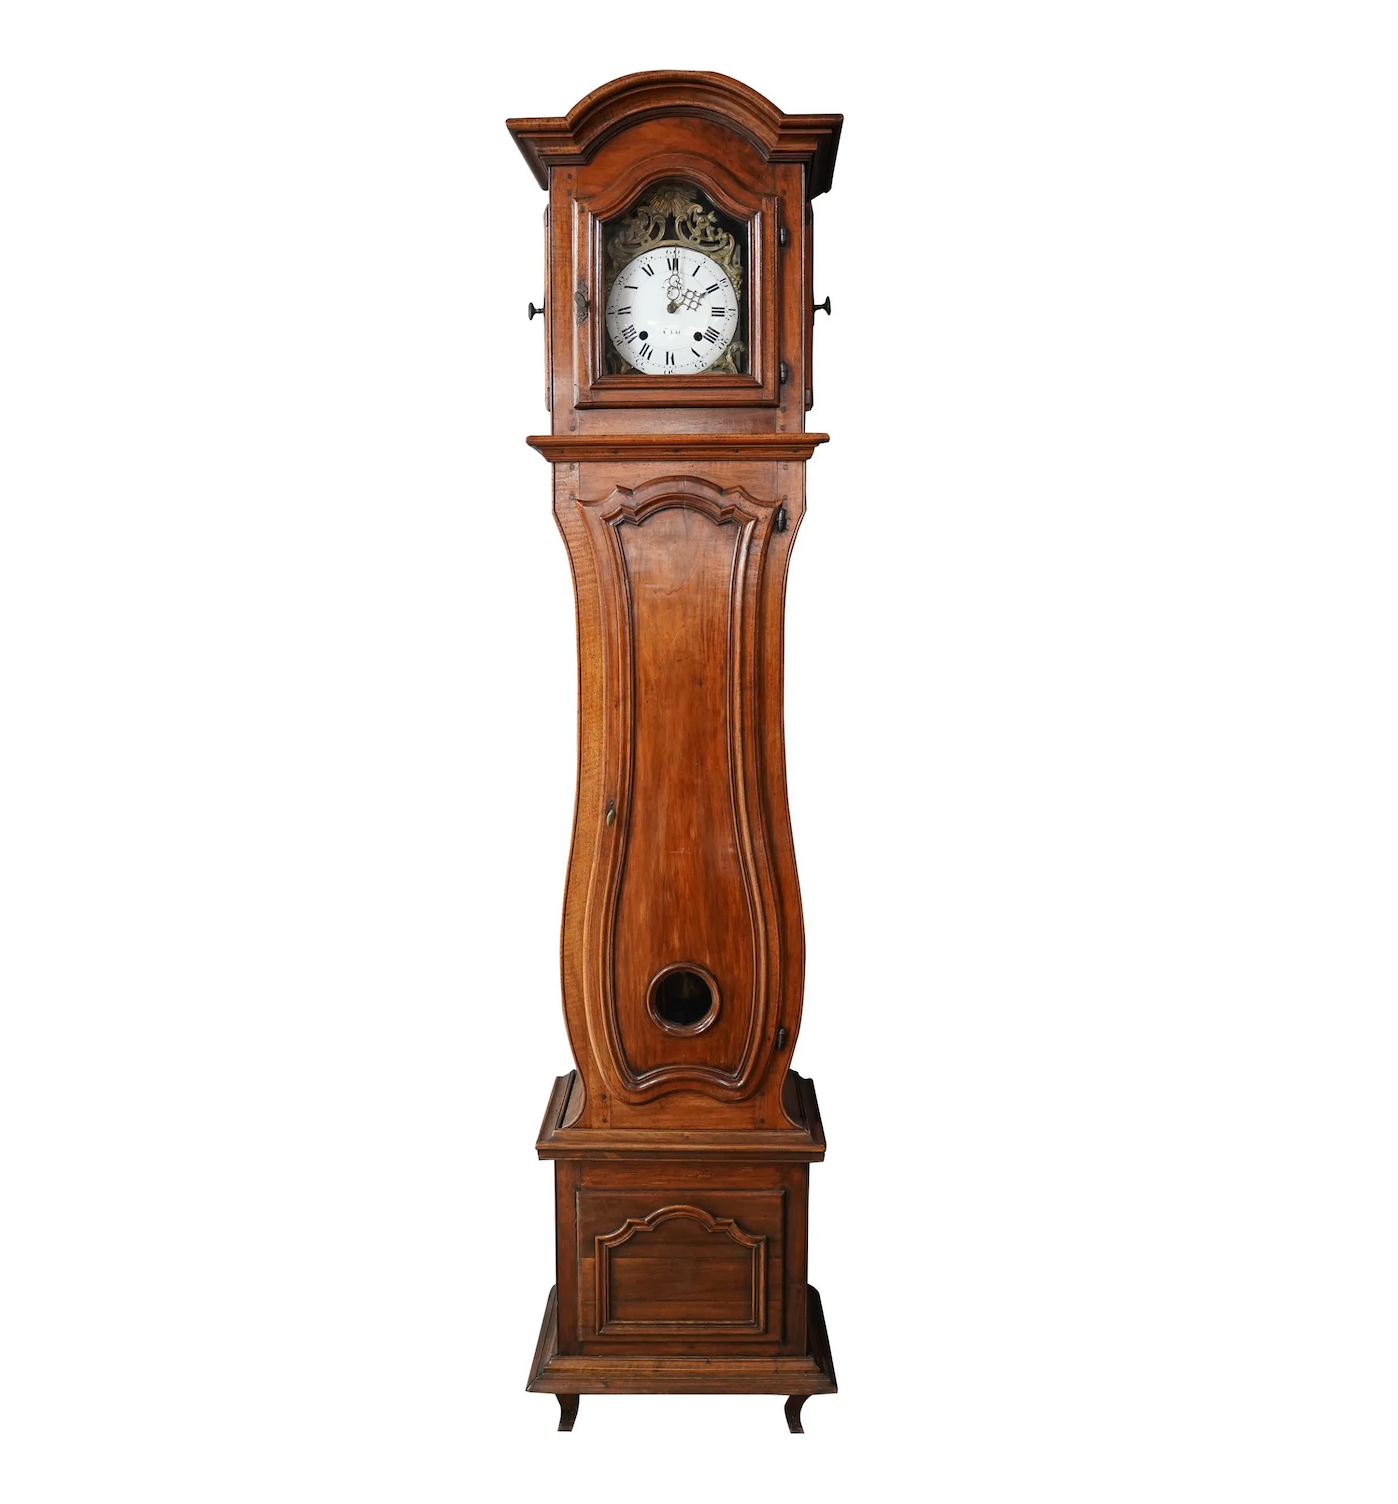 TK1-045: 18TH CENTURY FRENCH PROVINCIAL FRUITWOOD TALL CAS CLOCK